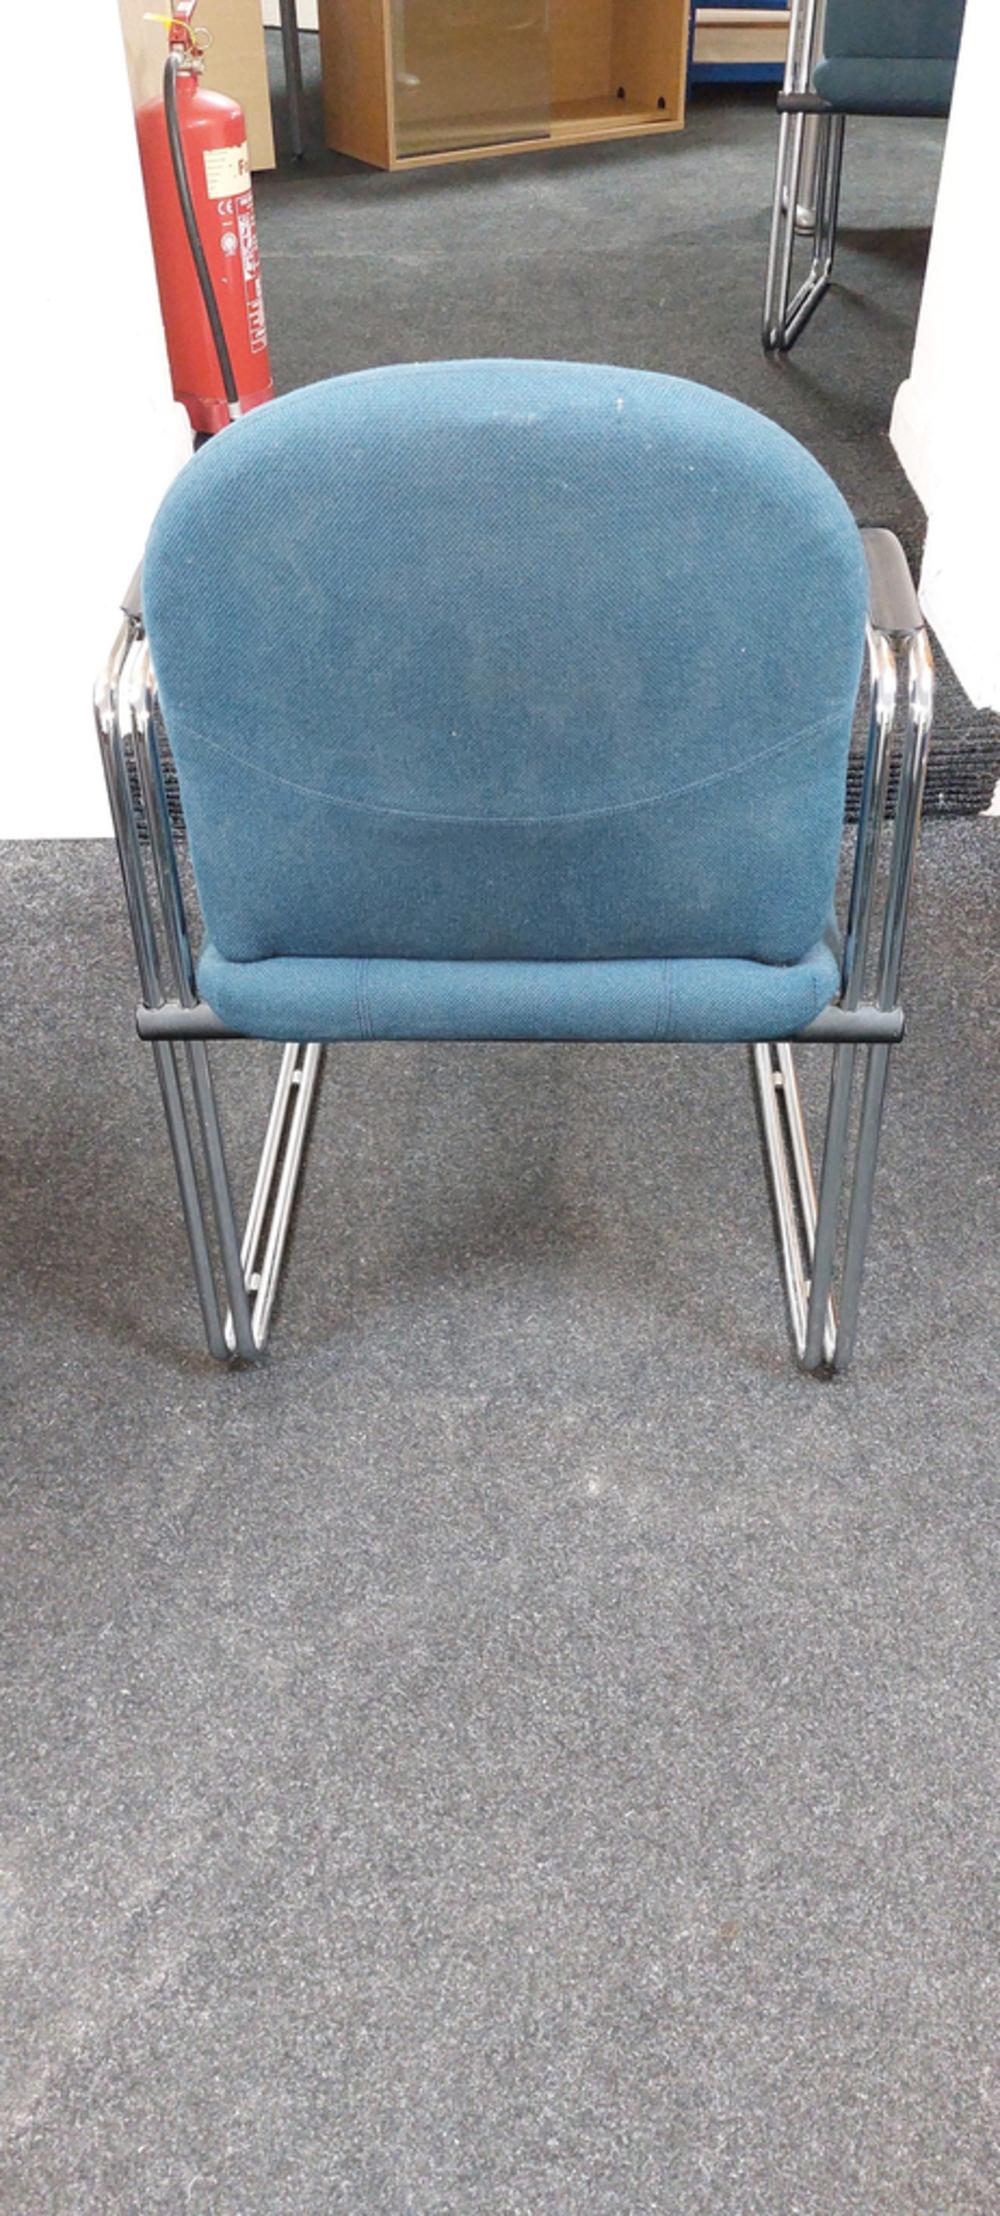 Green Fabric Meeting Chair With Chrome Frame And Fixed Arm Rests